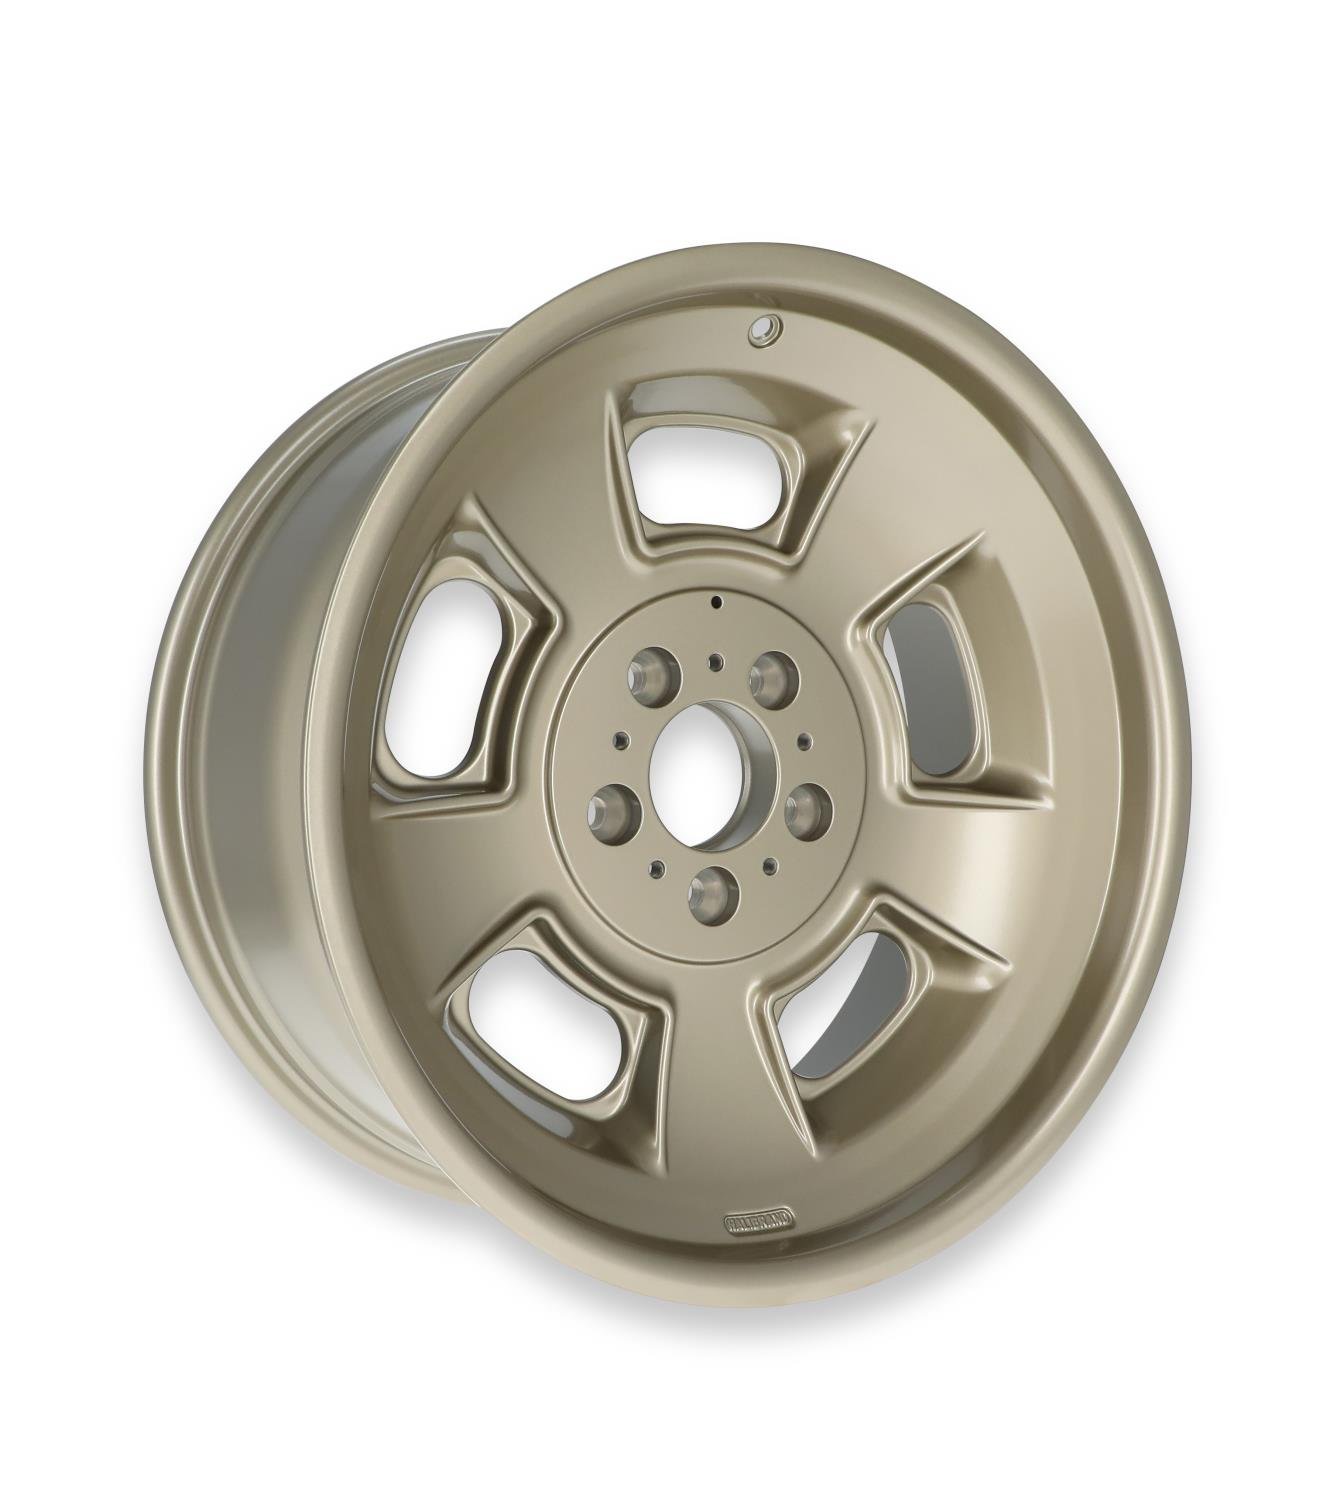 Sprint Front Wheel, Size: 19x8.5", Bolt Pattern: 5x5", Backspace: 4.5" [MAG7 - Semi Gloss Clearcoat]